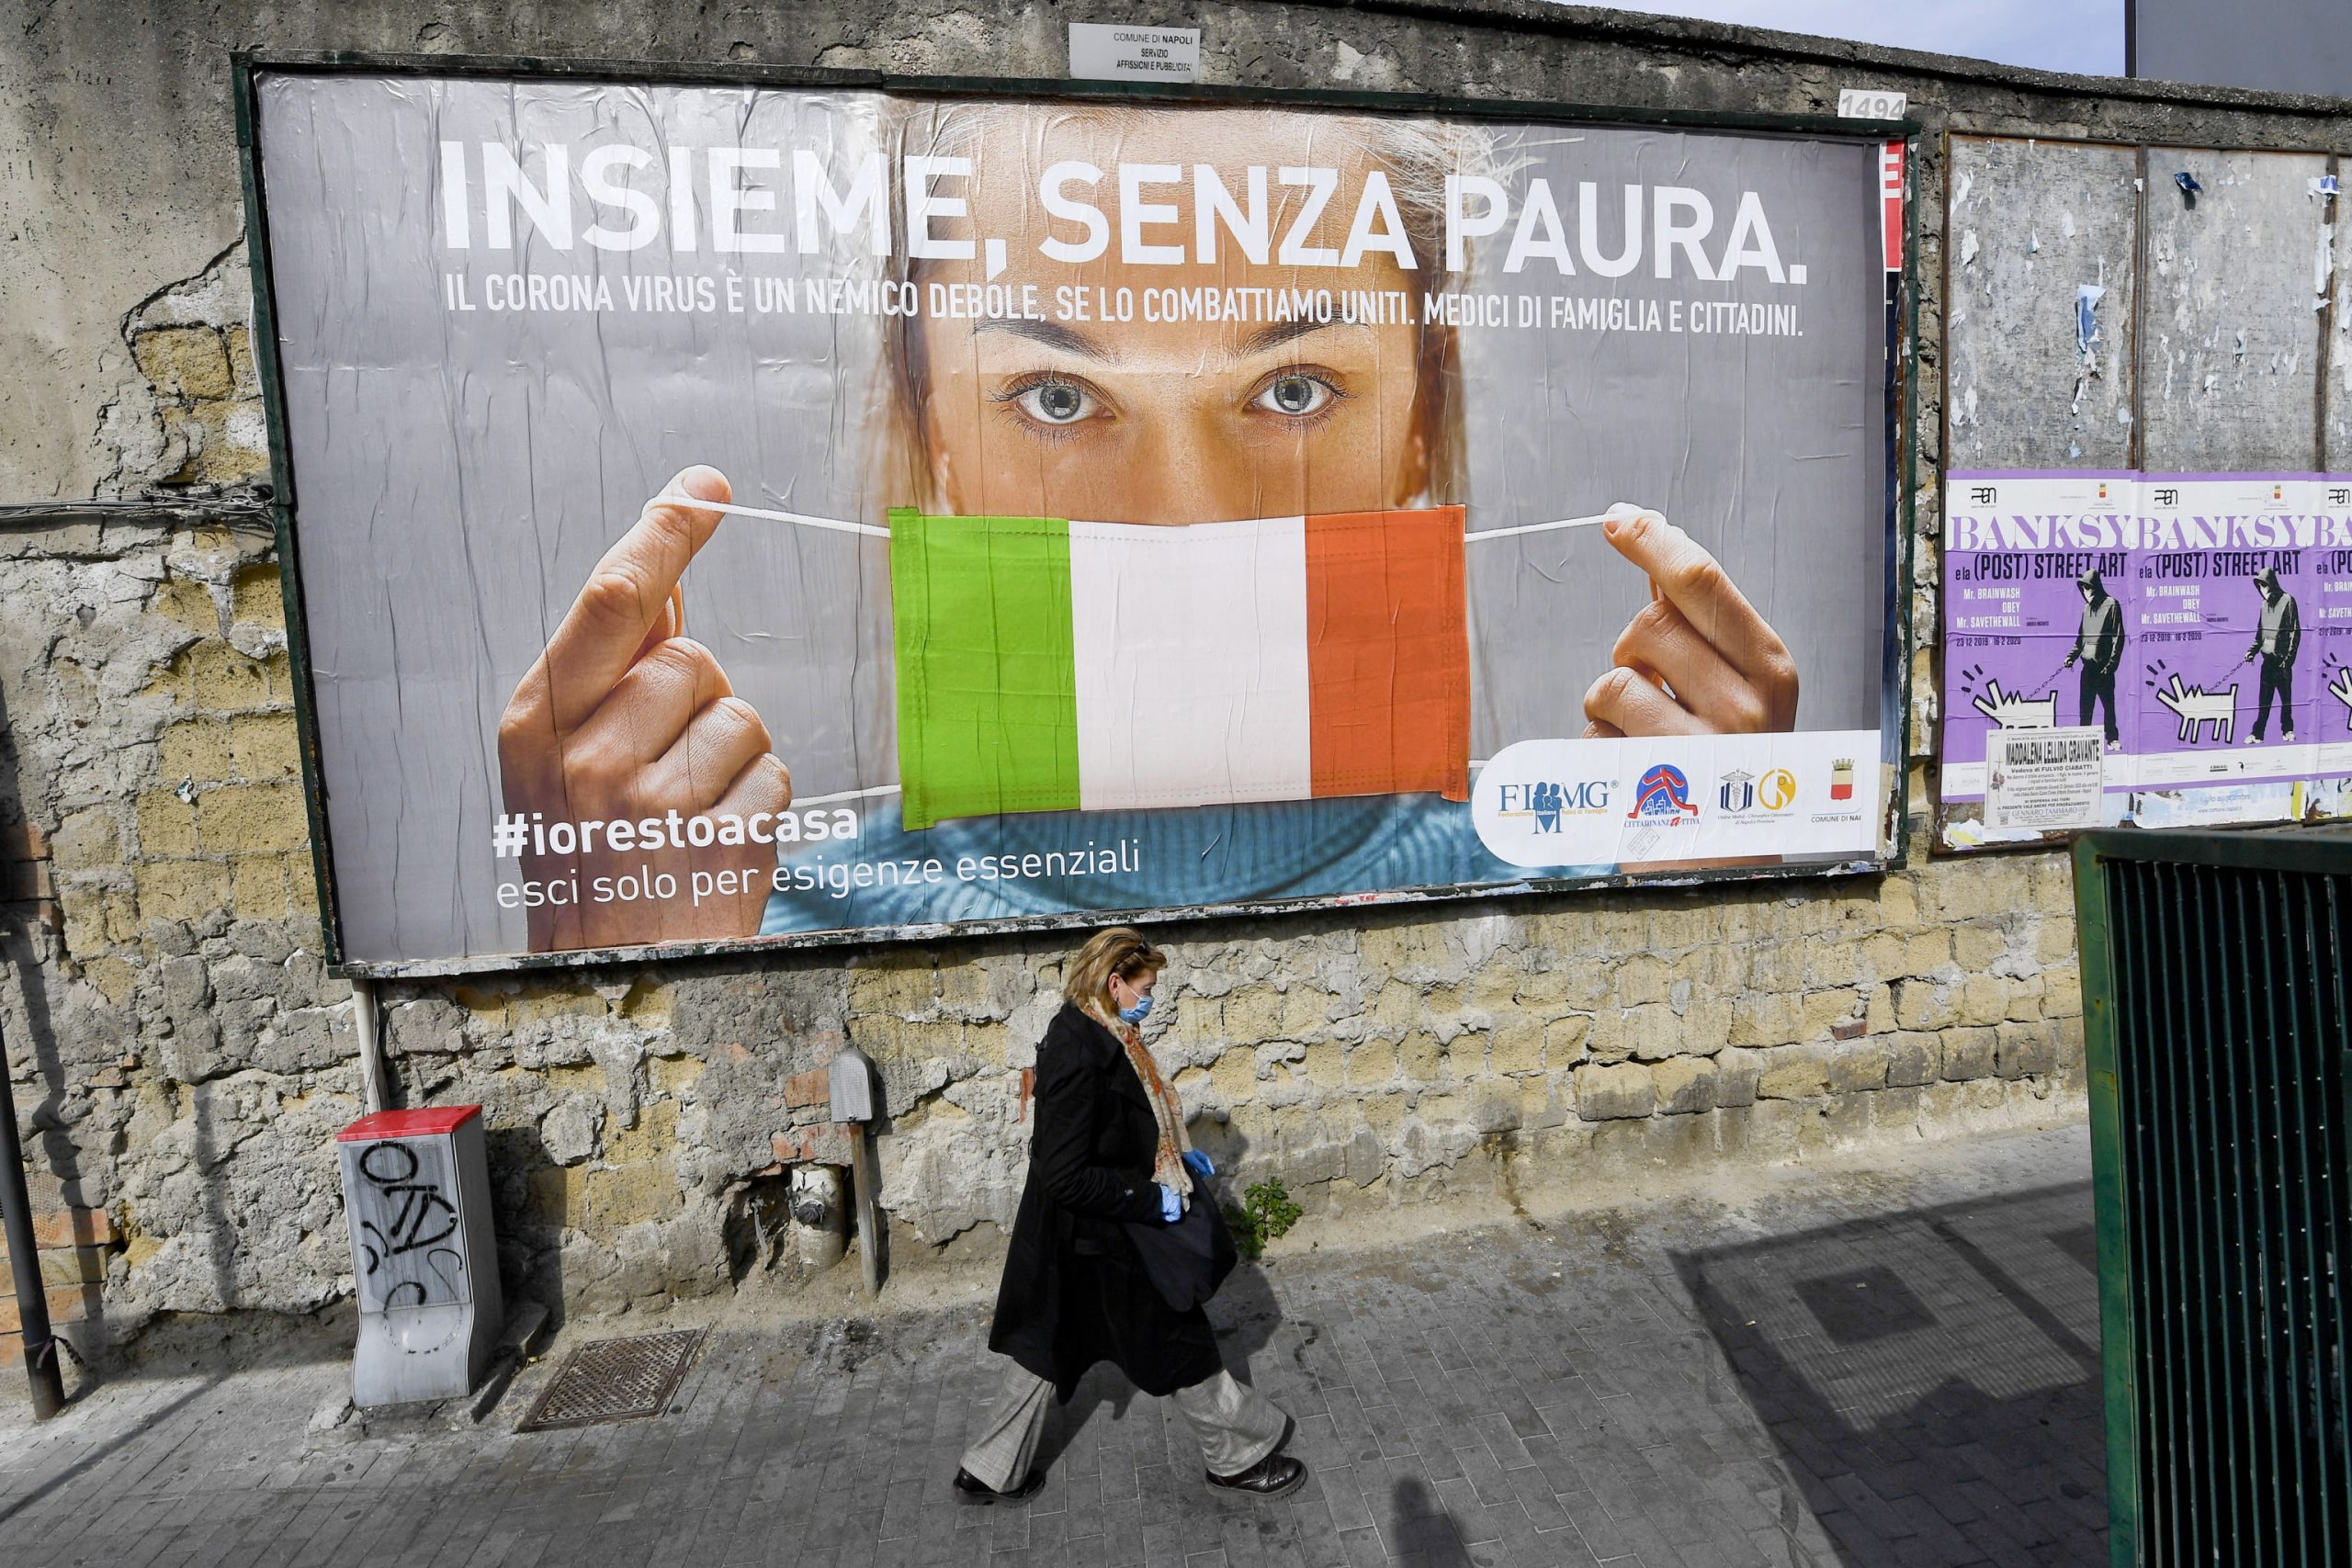 epa08311347 A woman passes a large billboard that reads in Italian 'Together, without fear' referring to the coronavirus Covid19 pandemic, in Naples, Italy, 21 March 2020. The number of deaths from the pandemic COVID-19 disease caused by the SARS CoV-2 coronavirus in Italy has now surpassed the death toll for all of China, where the outbreak originated. According to the Civil Protection agency, the total number of confirmed infections has risen to more than 47,000, while over 4,000 people have lost their lives to the disease in the Mediterranean country.  EPA/CIRO FUSCO